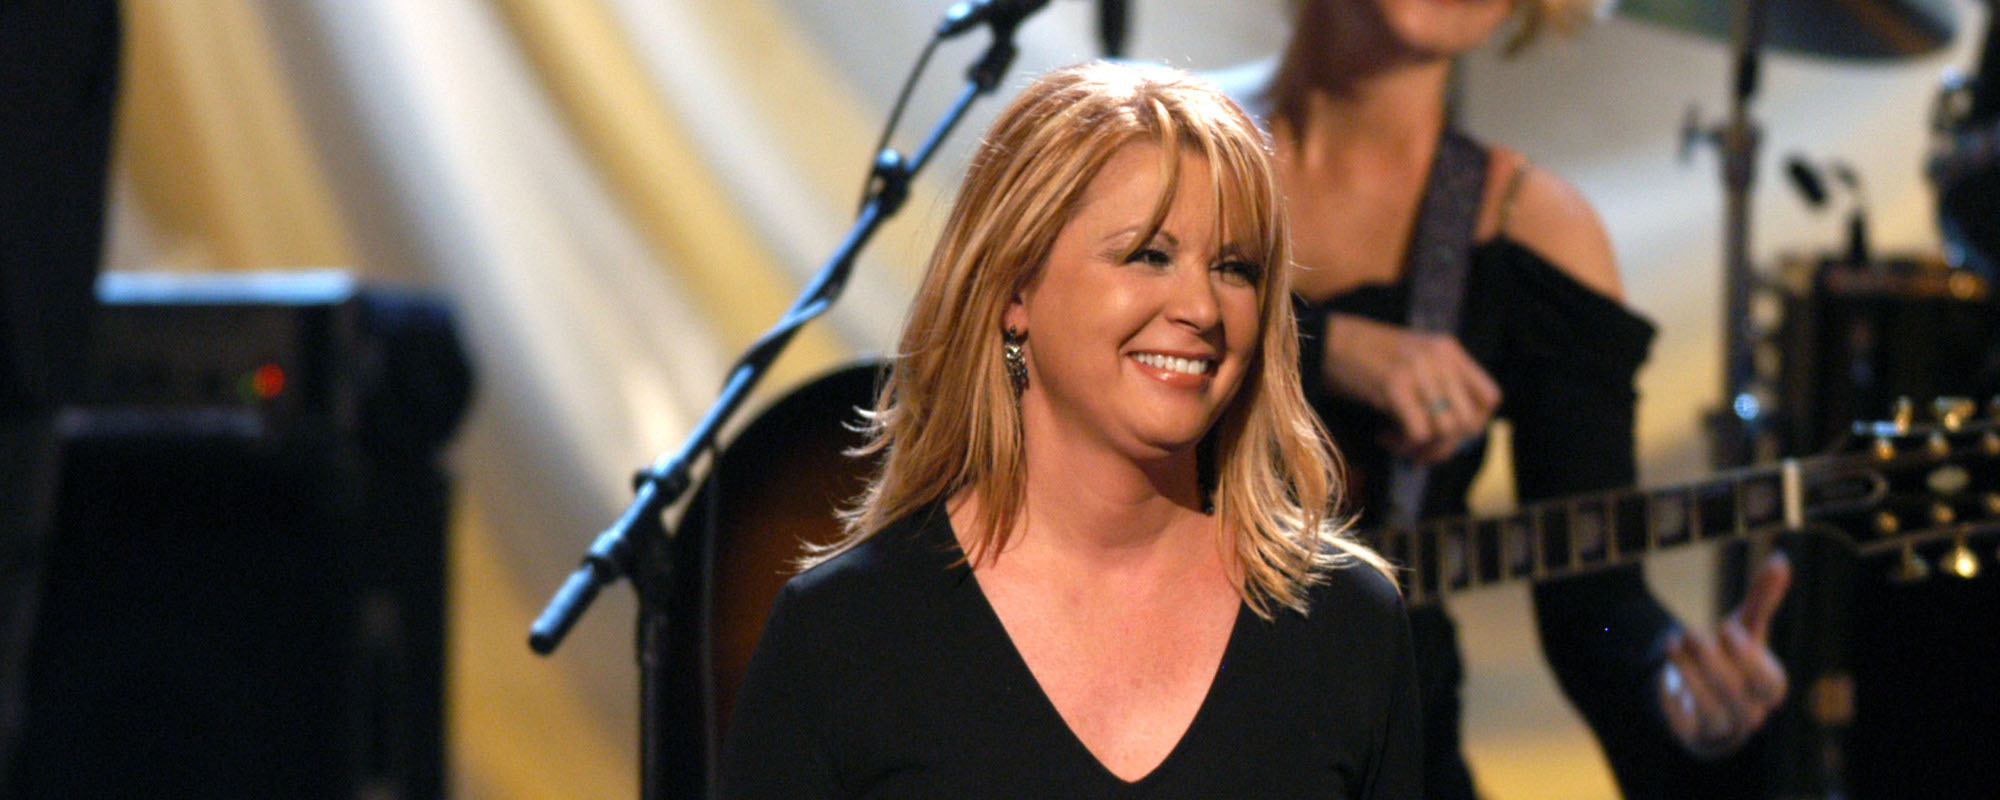 Country Music Hall of Fame and Museum Announces Patty Loveless Exhibit